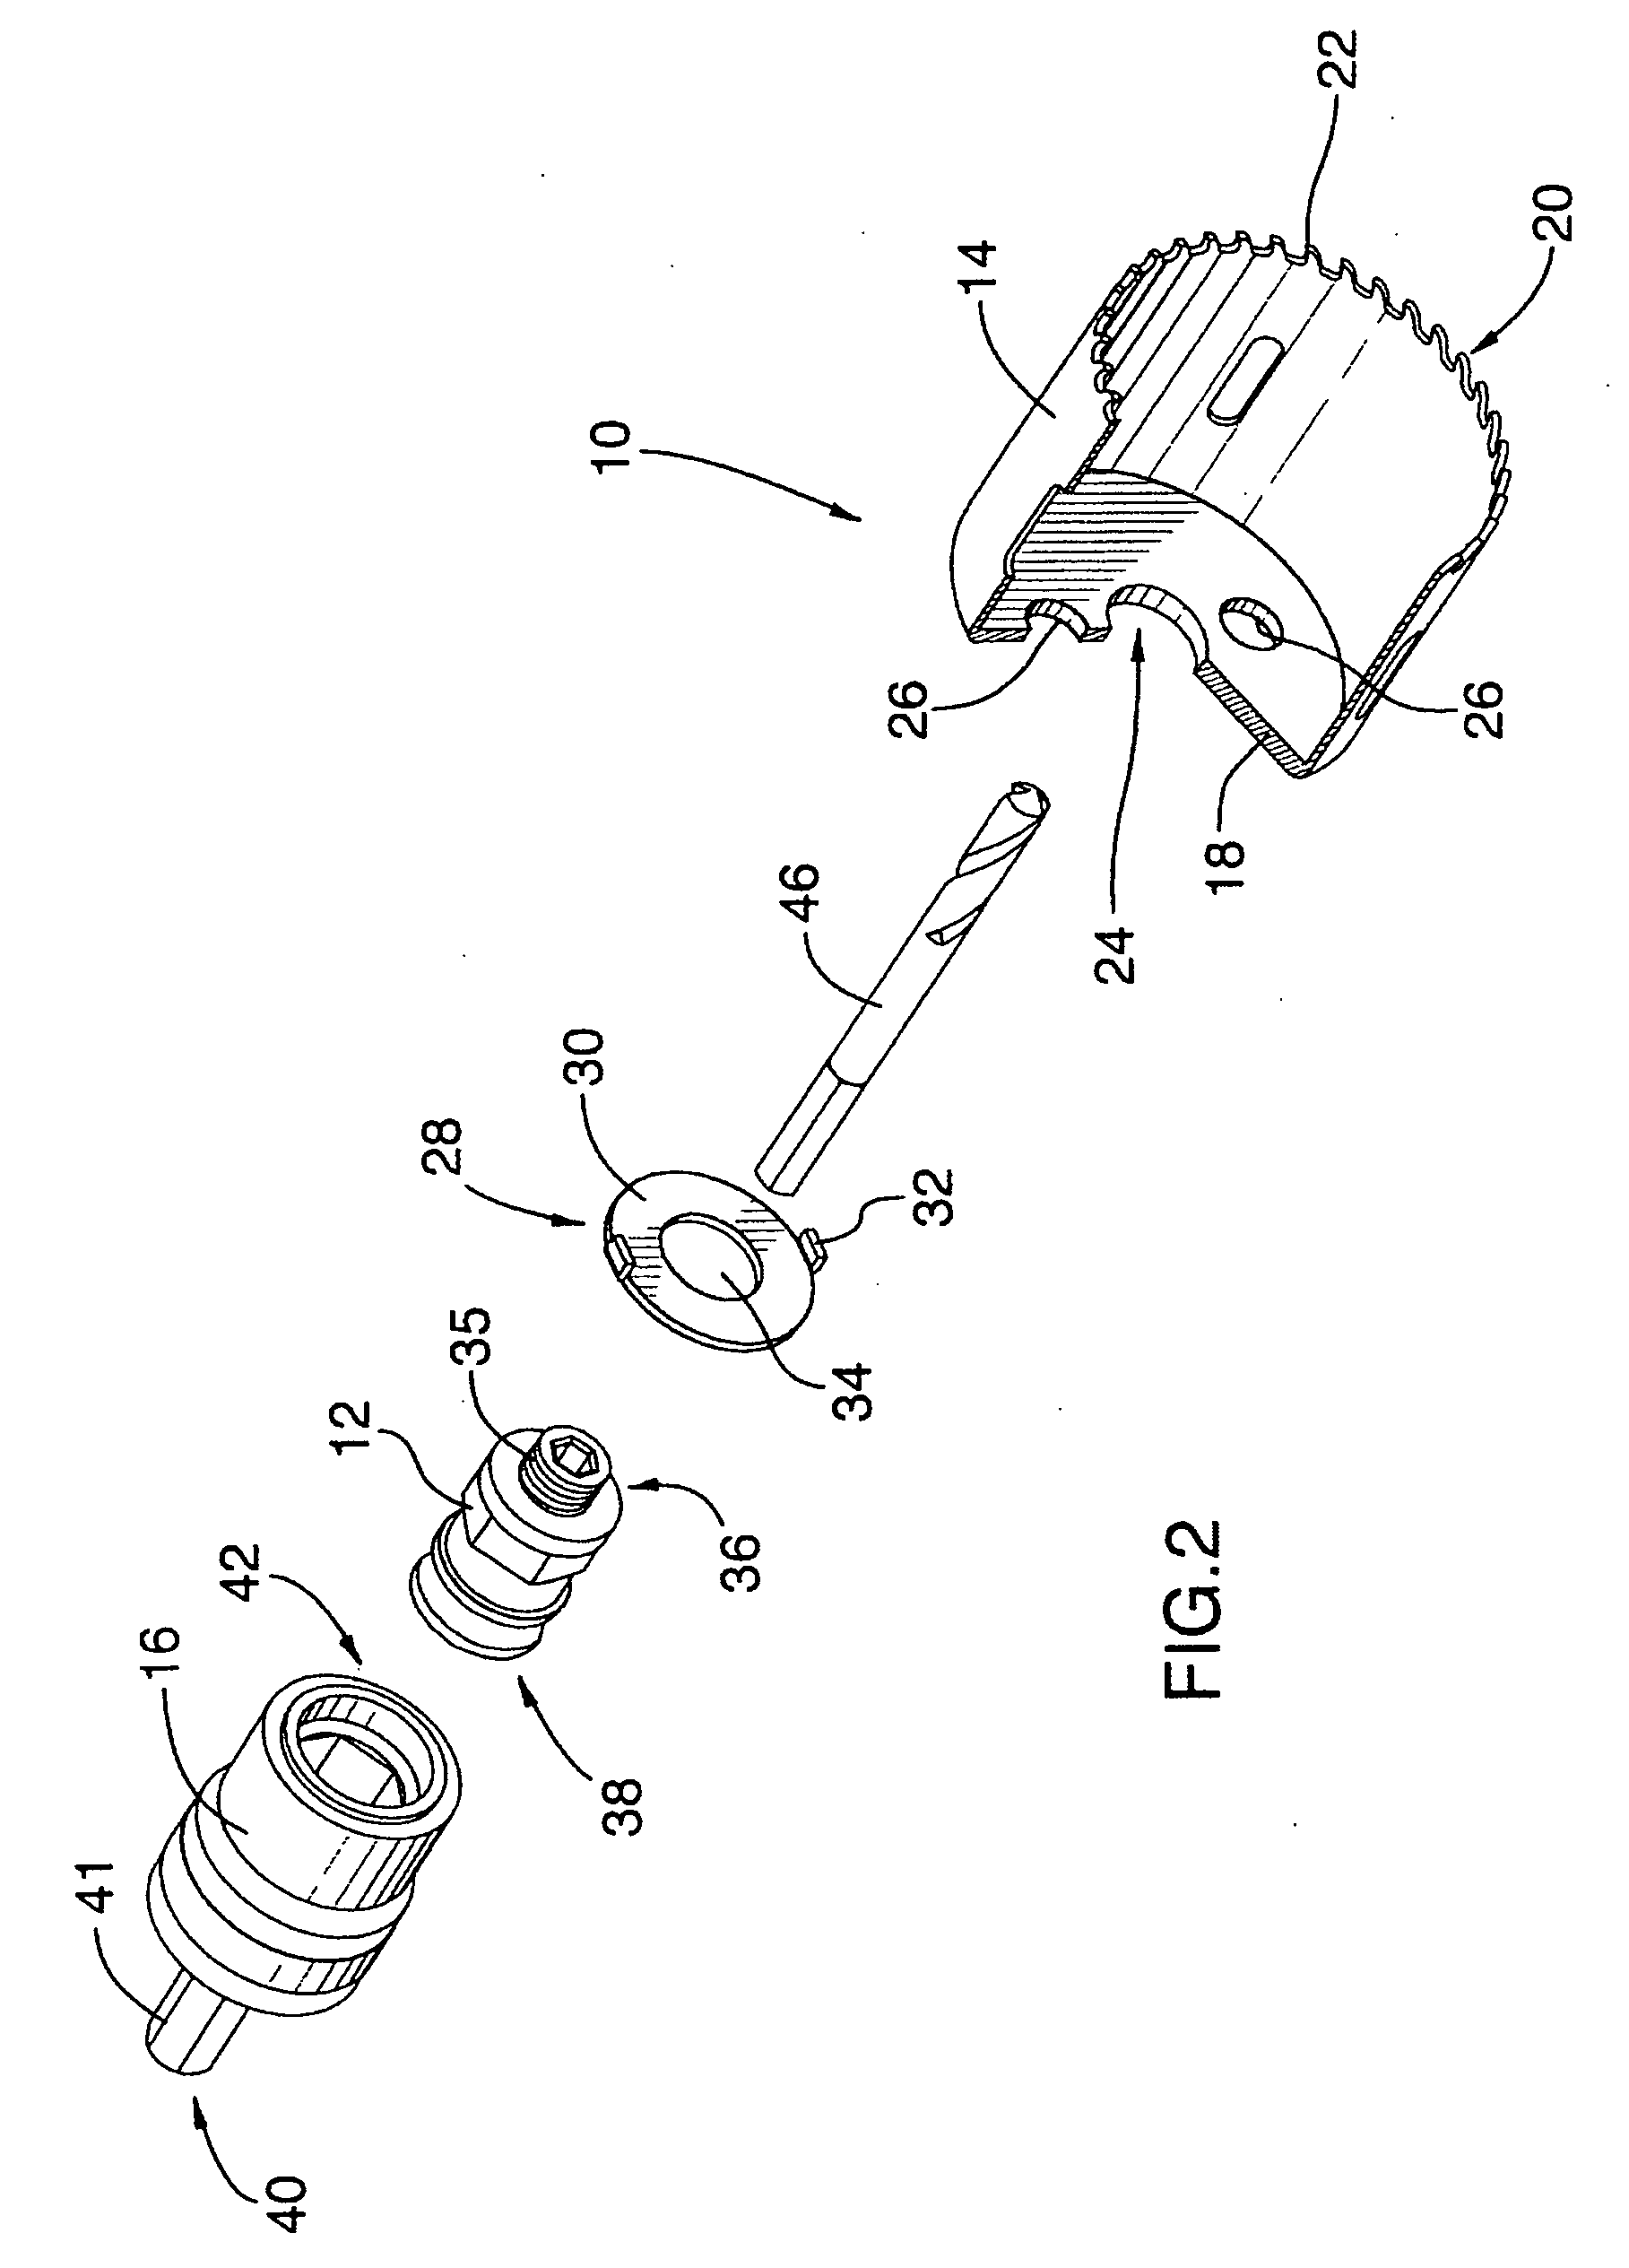 Universal quick connect system for a hole saw